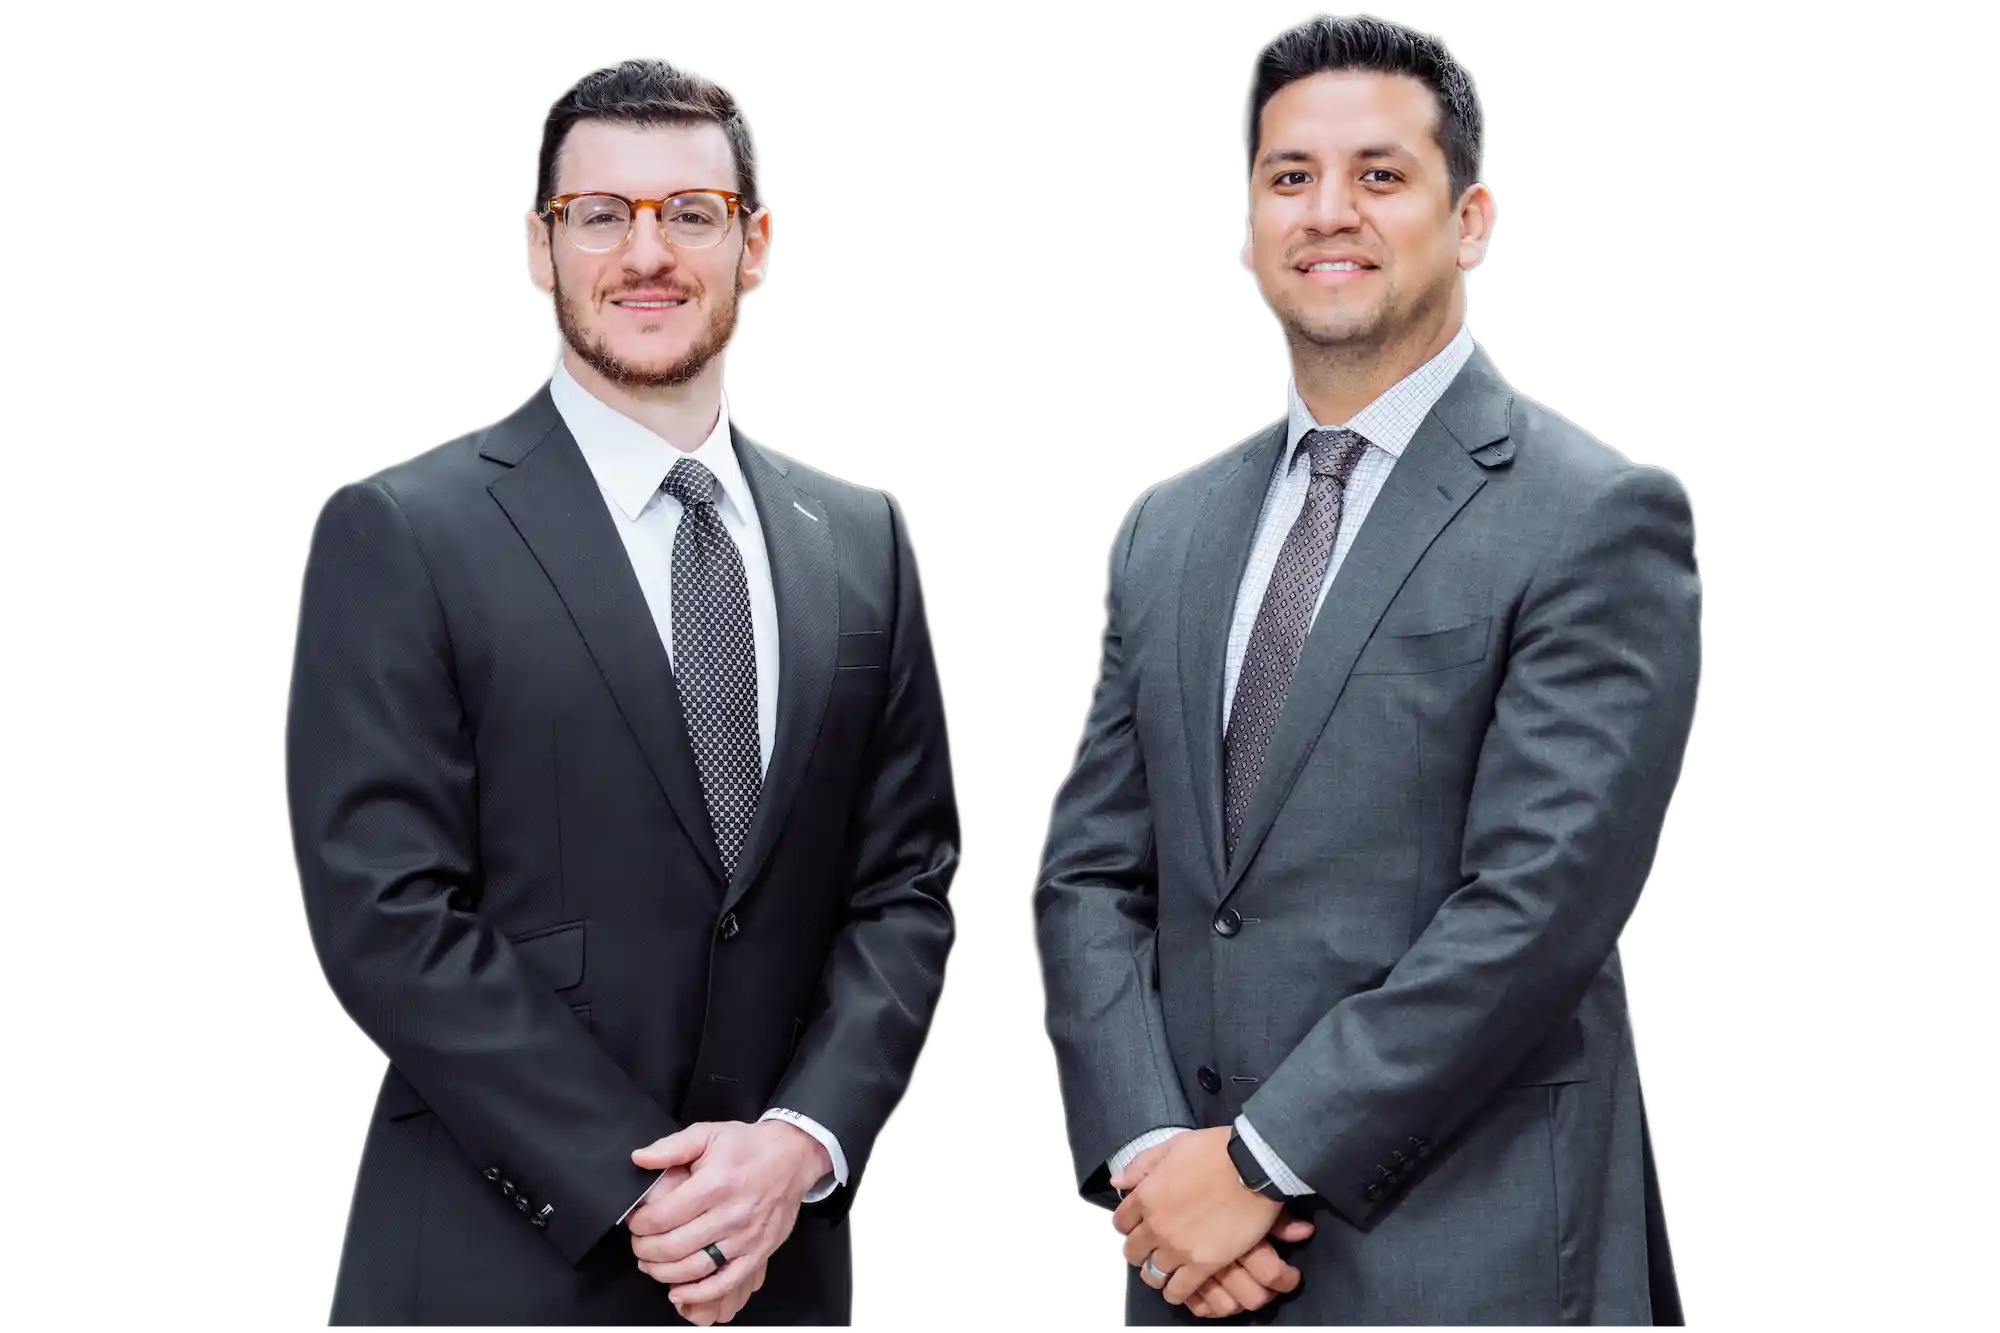 julio-and-anthony-lawyers-of-costa-ivone-llc